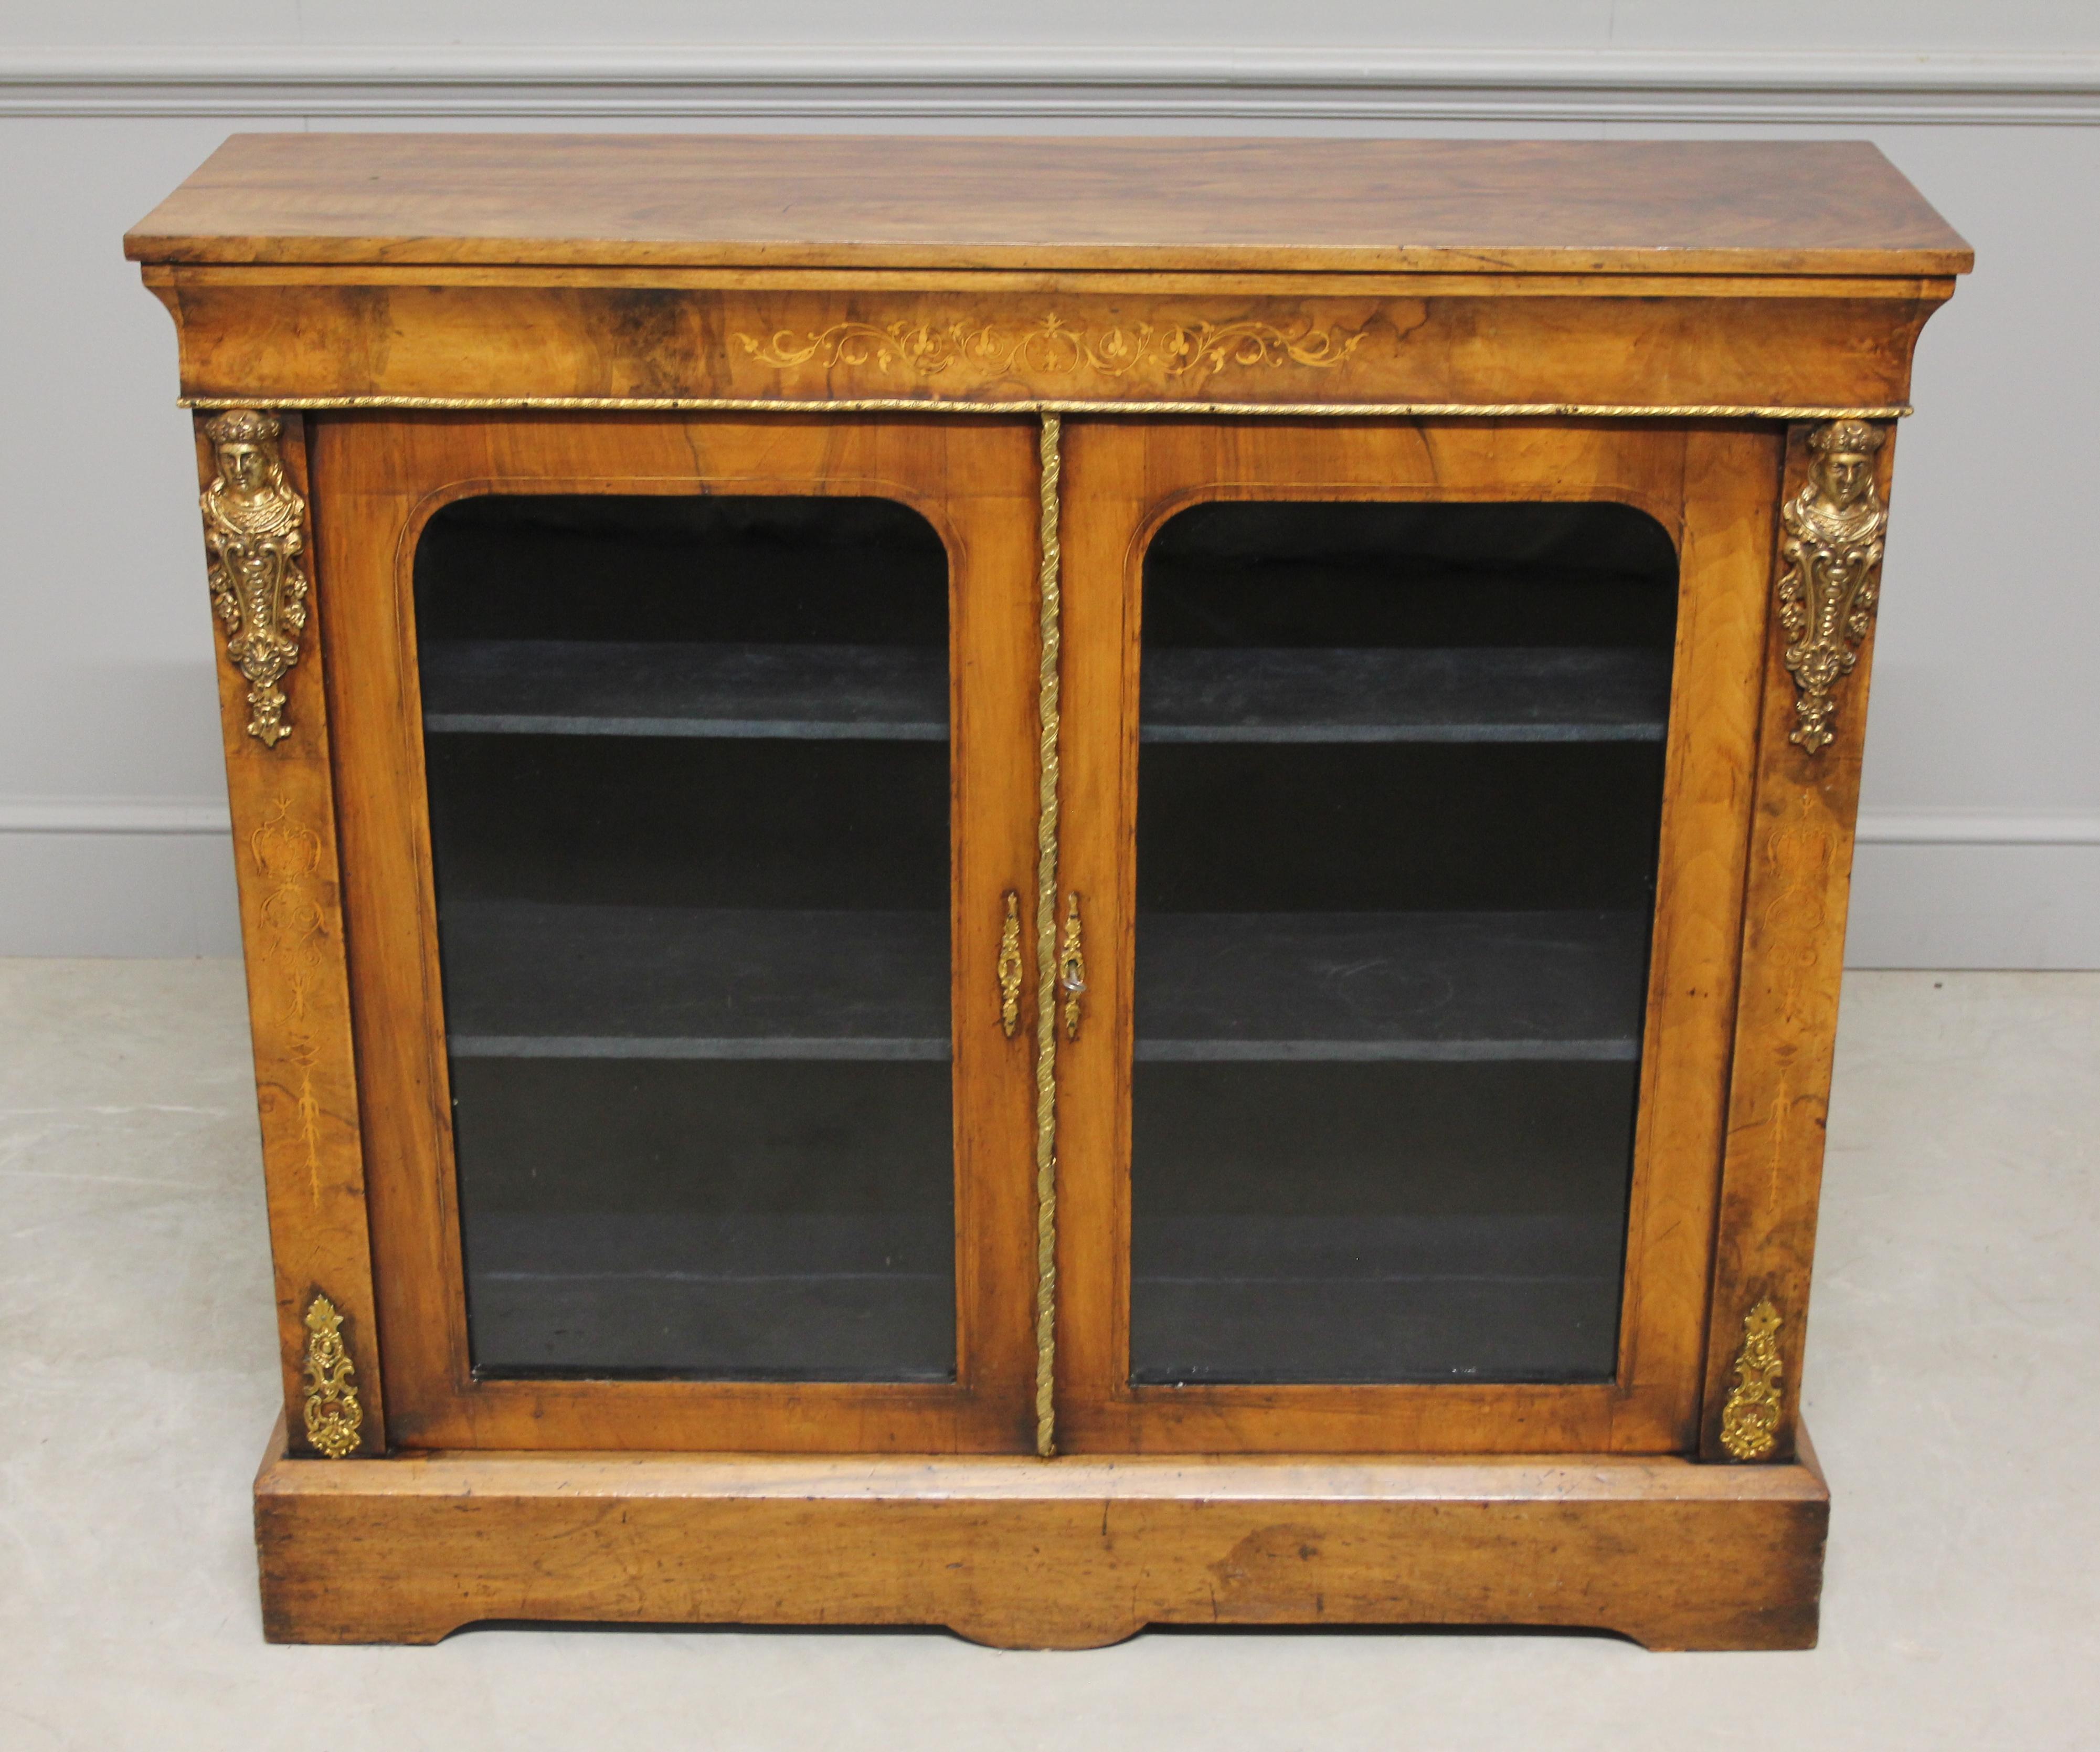 A Victorian burr walnut two door display cabinet with ormolu mounts and satinwood Arabesque inlay on a shaped plinth base, with working key and lock.
Measures: H 104cms W 114cms x D 32cms 
Coming from the Queen Victoria period is burr walnut